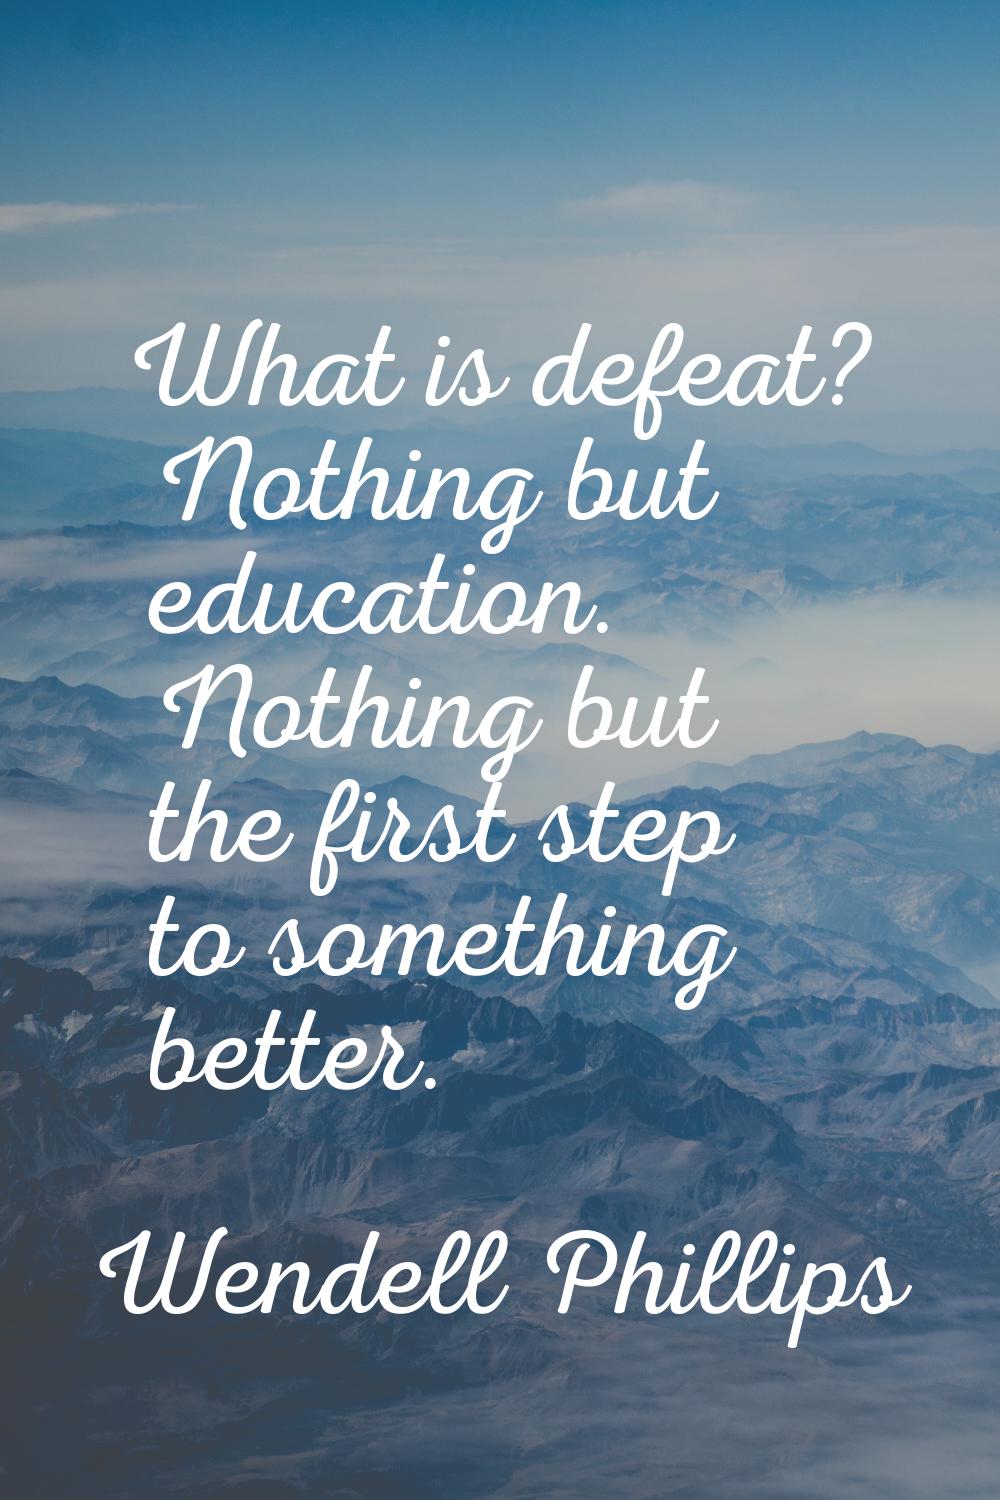 What is defeat? Nothing but education. Nothing but the first step to something better.